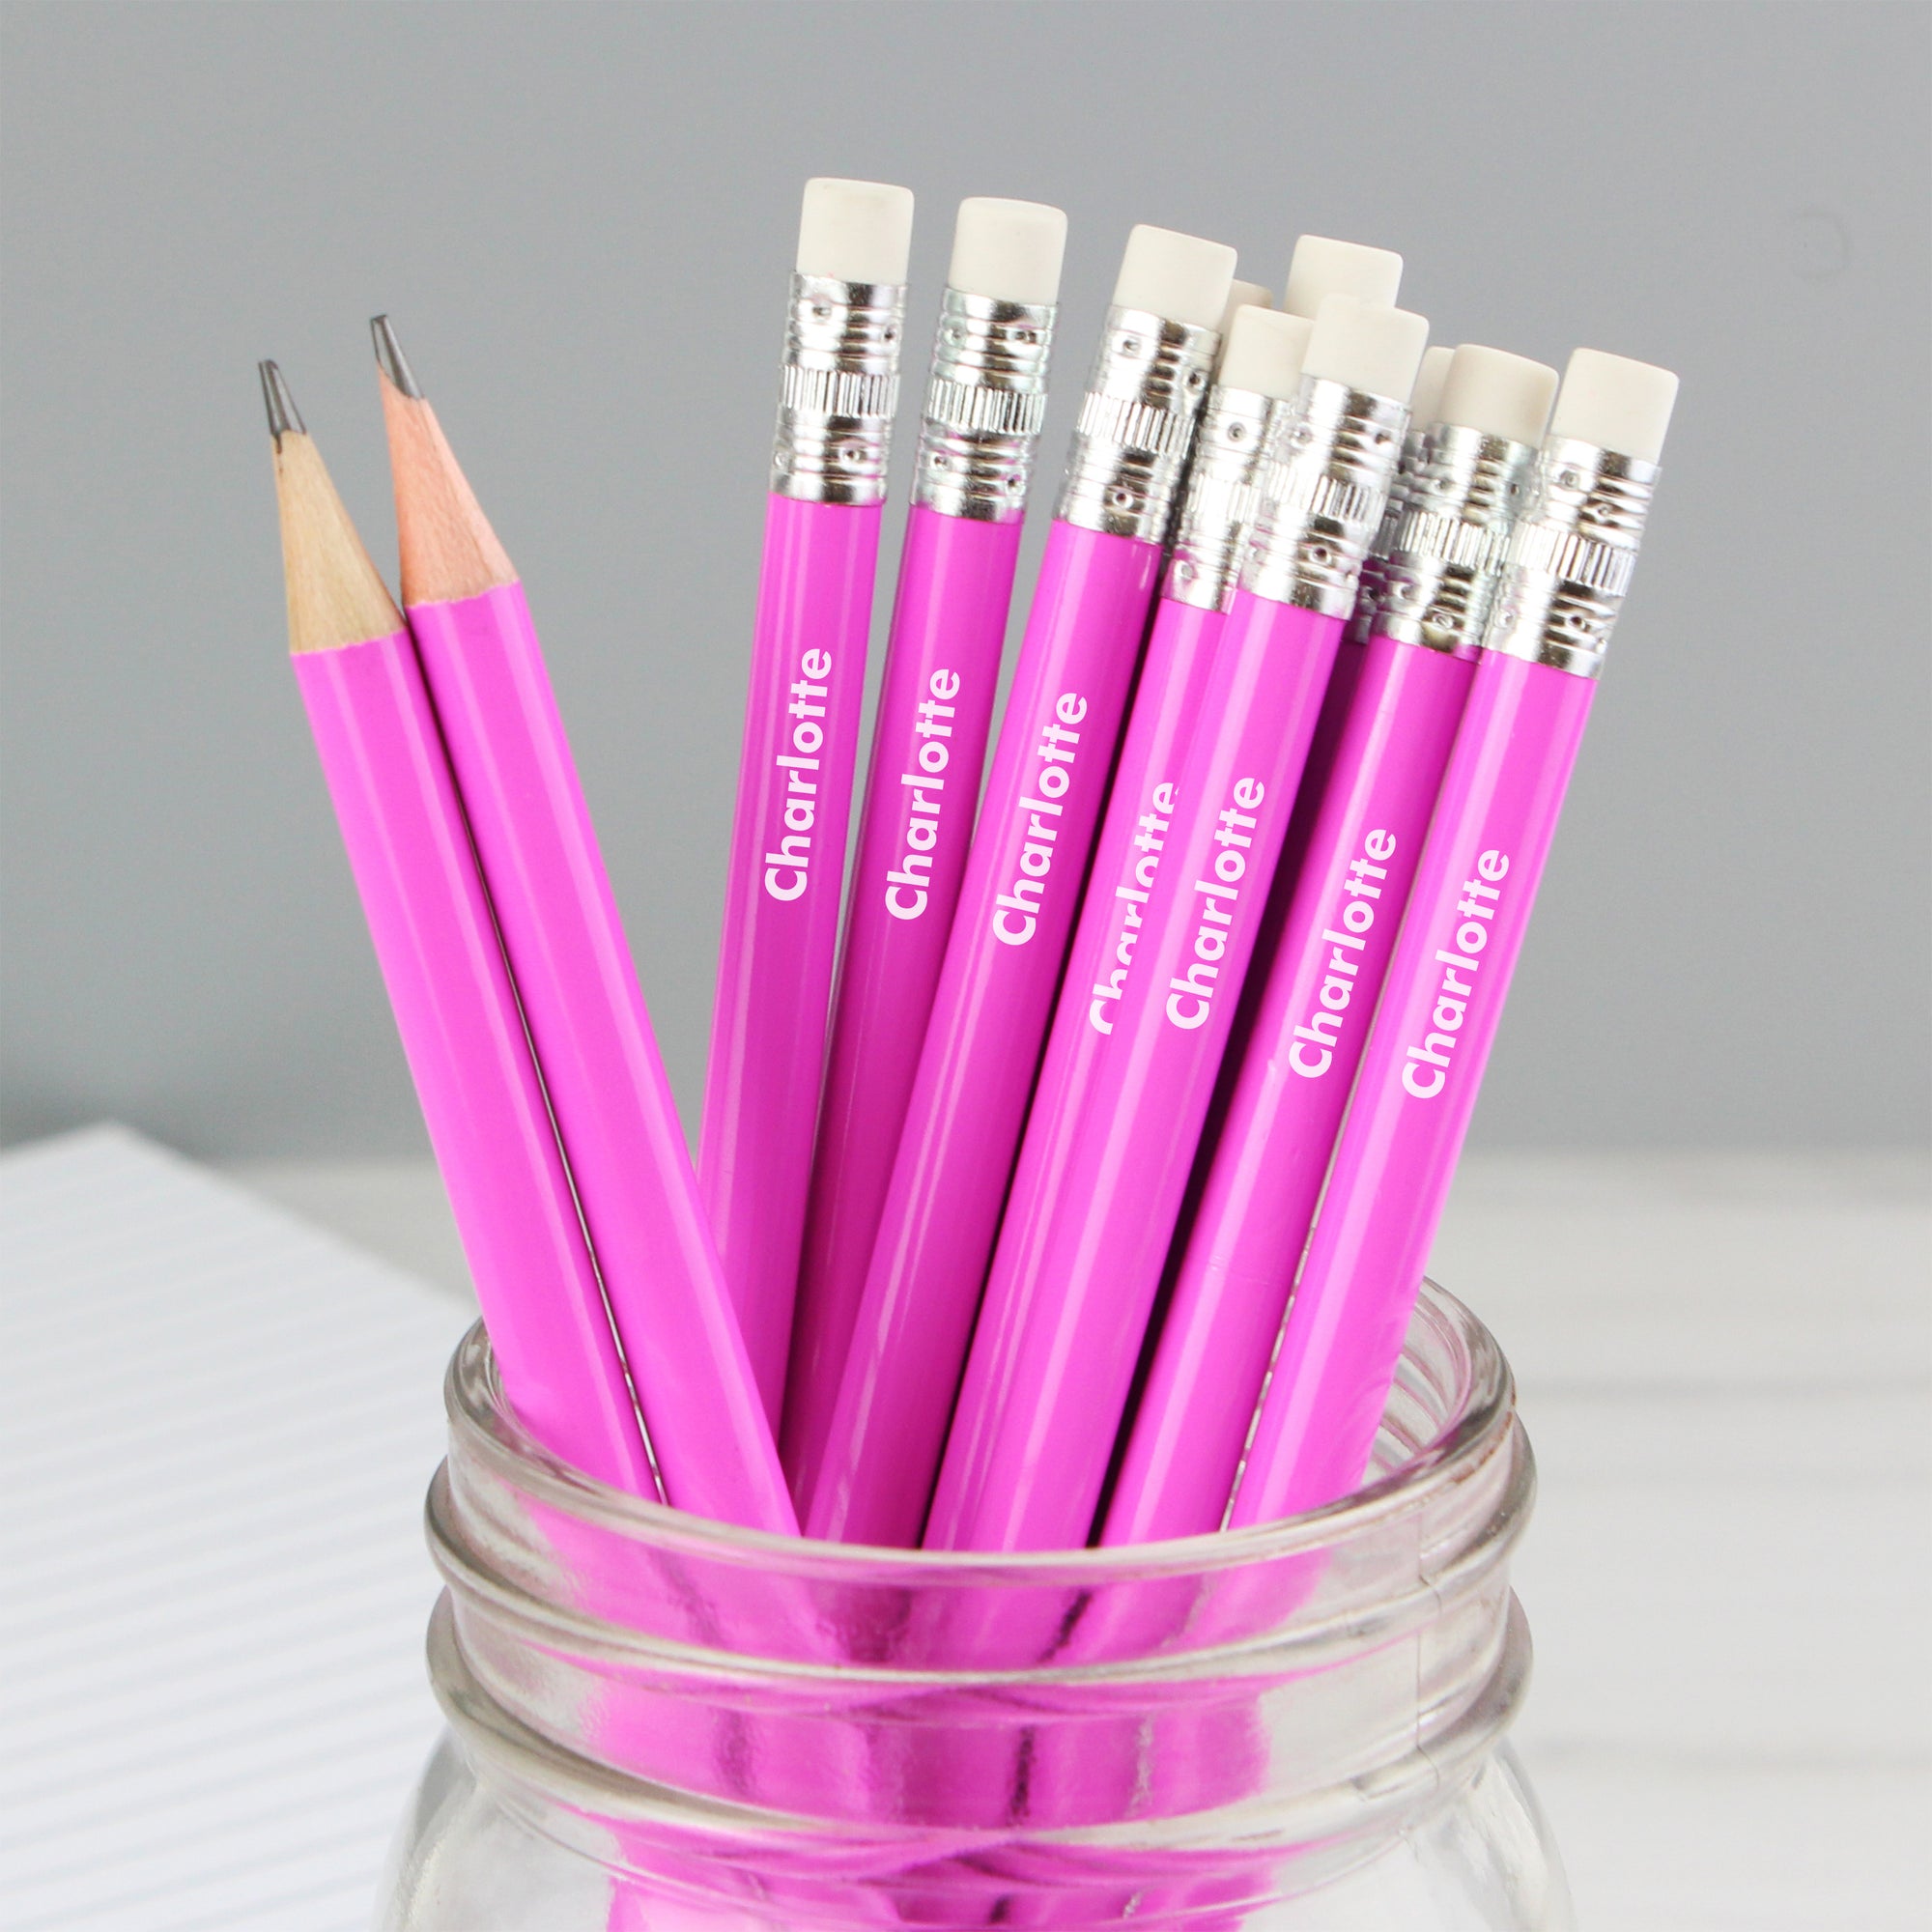 Set of 12 personalised HB pink pencils topped with an eraser.